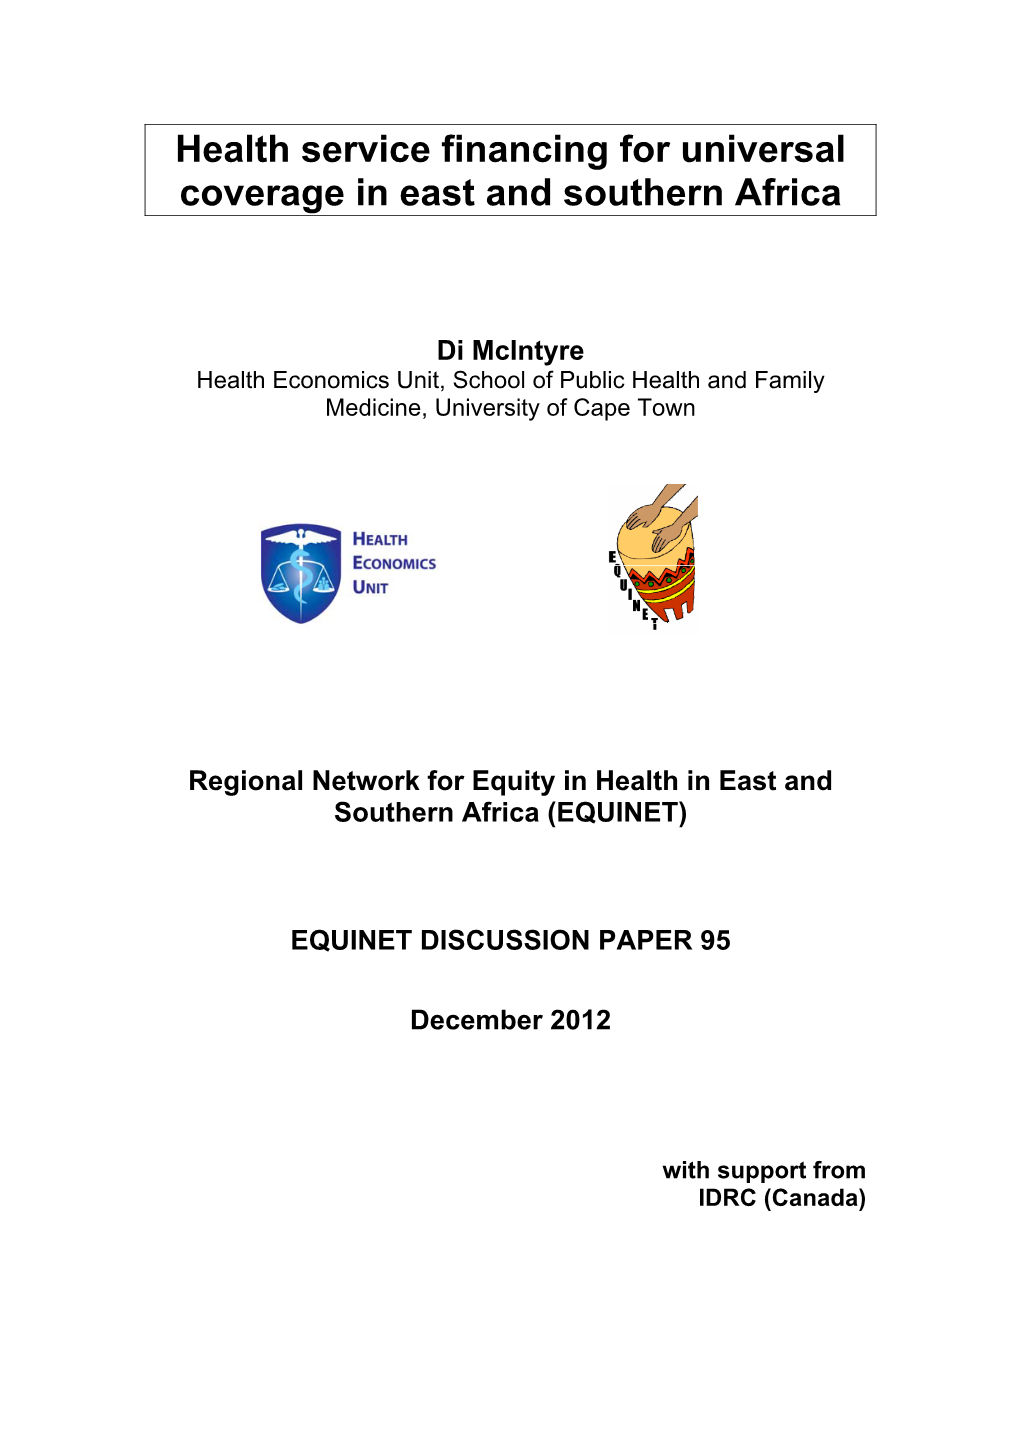 Health Service Financing for Universal Coverage in East and Southern Africa